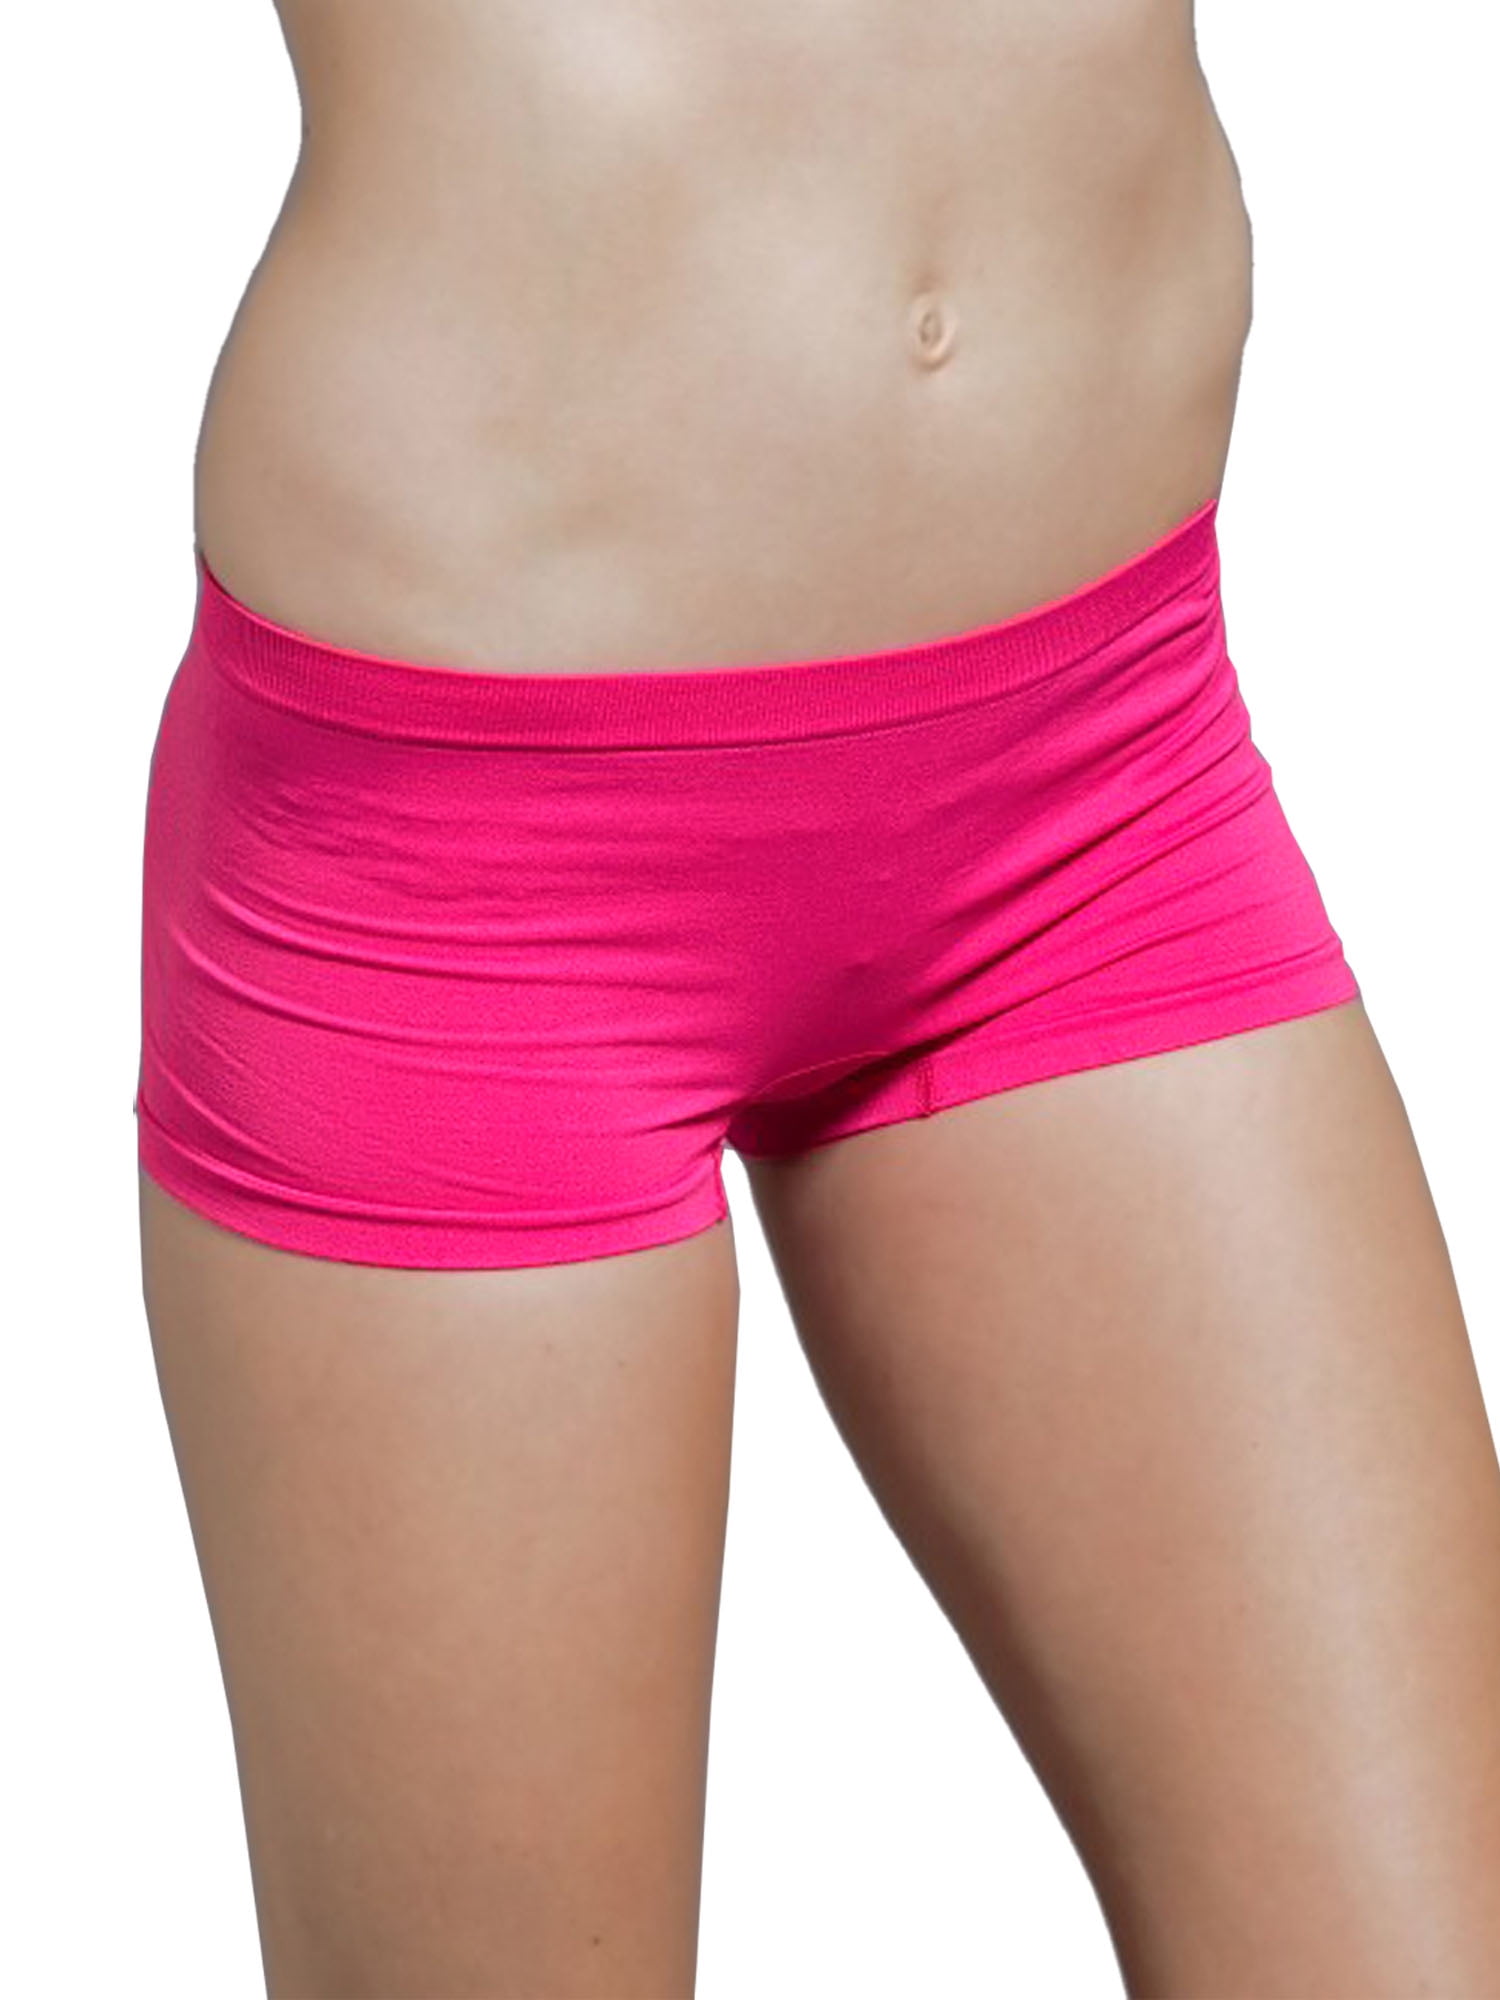 3/6 Boy Shorts Stretch Seamless Dance Exercise Booty Mini Panties